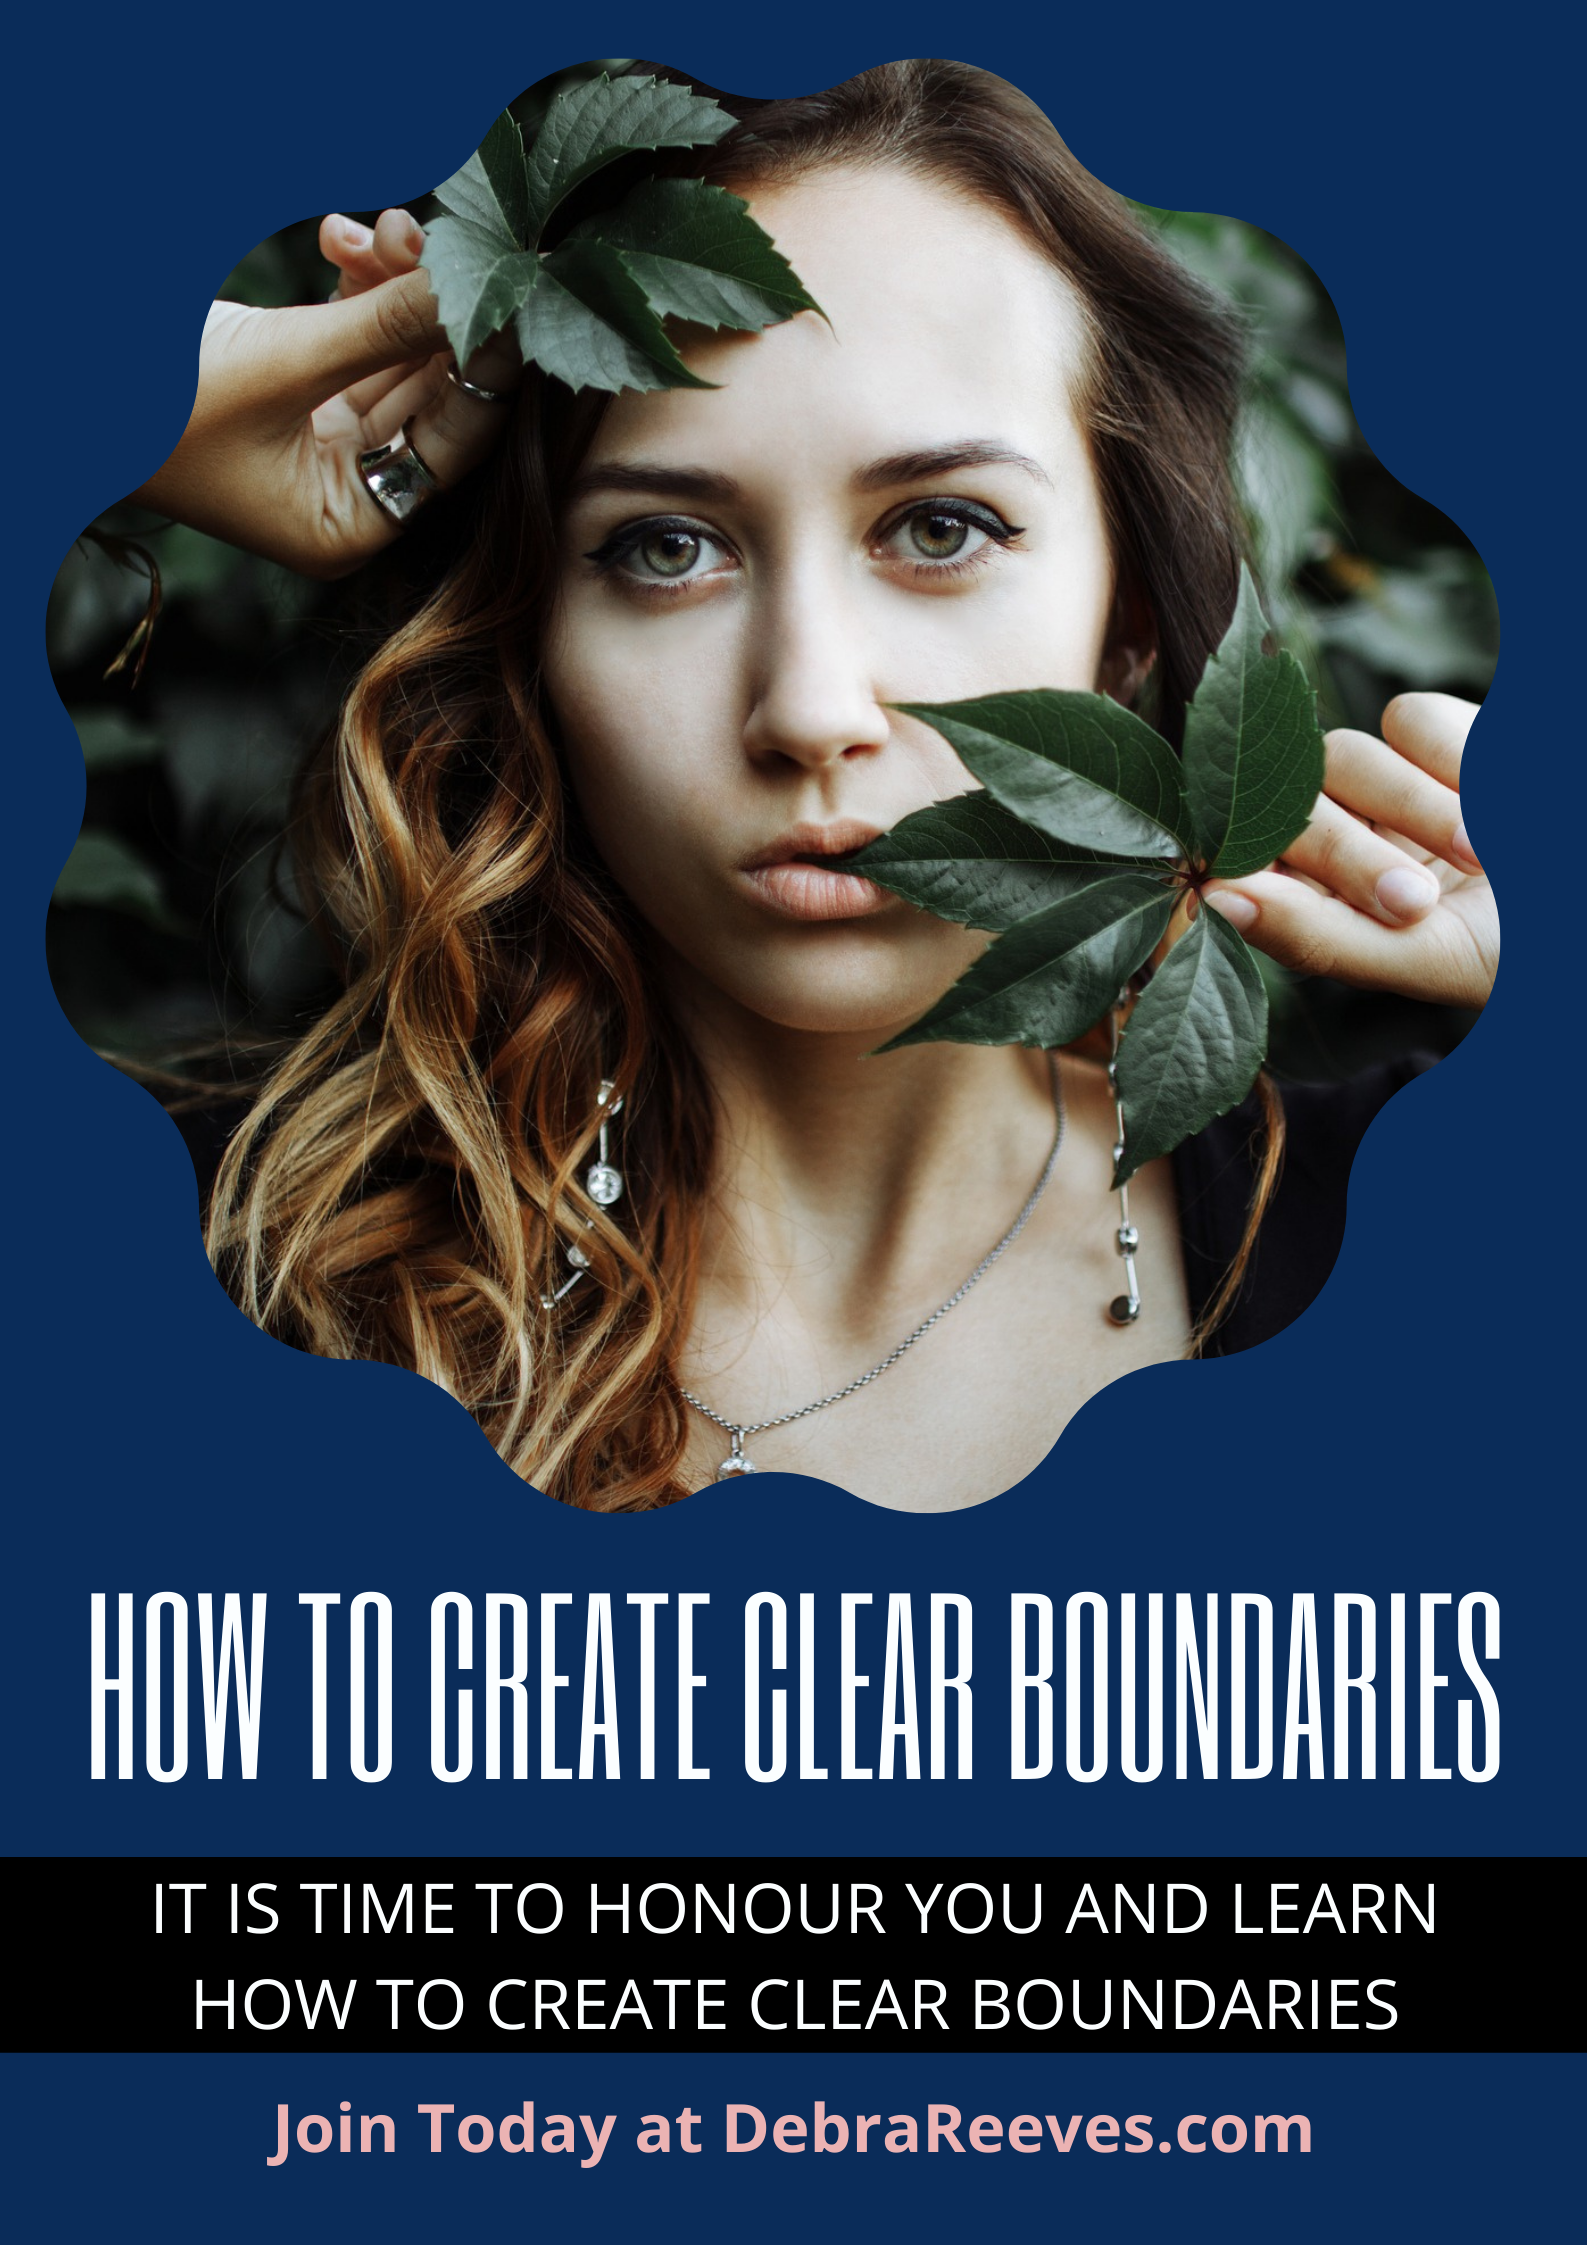 HOW TO CREATE CLEAR BOUNDARIES